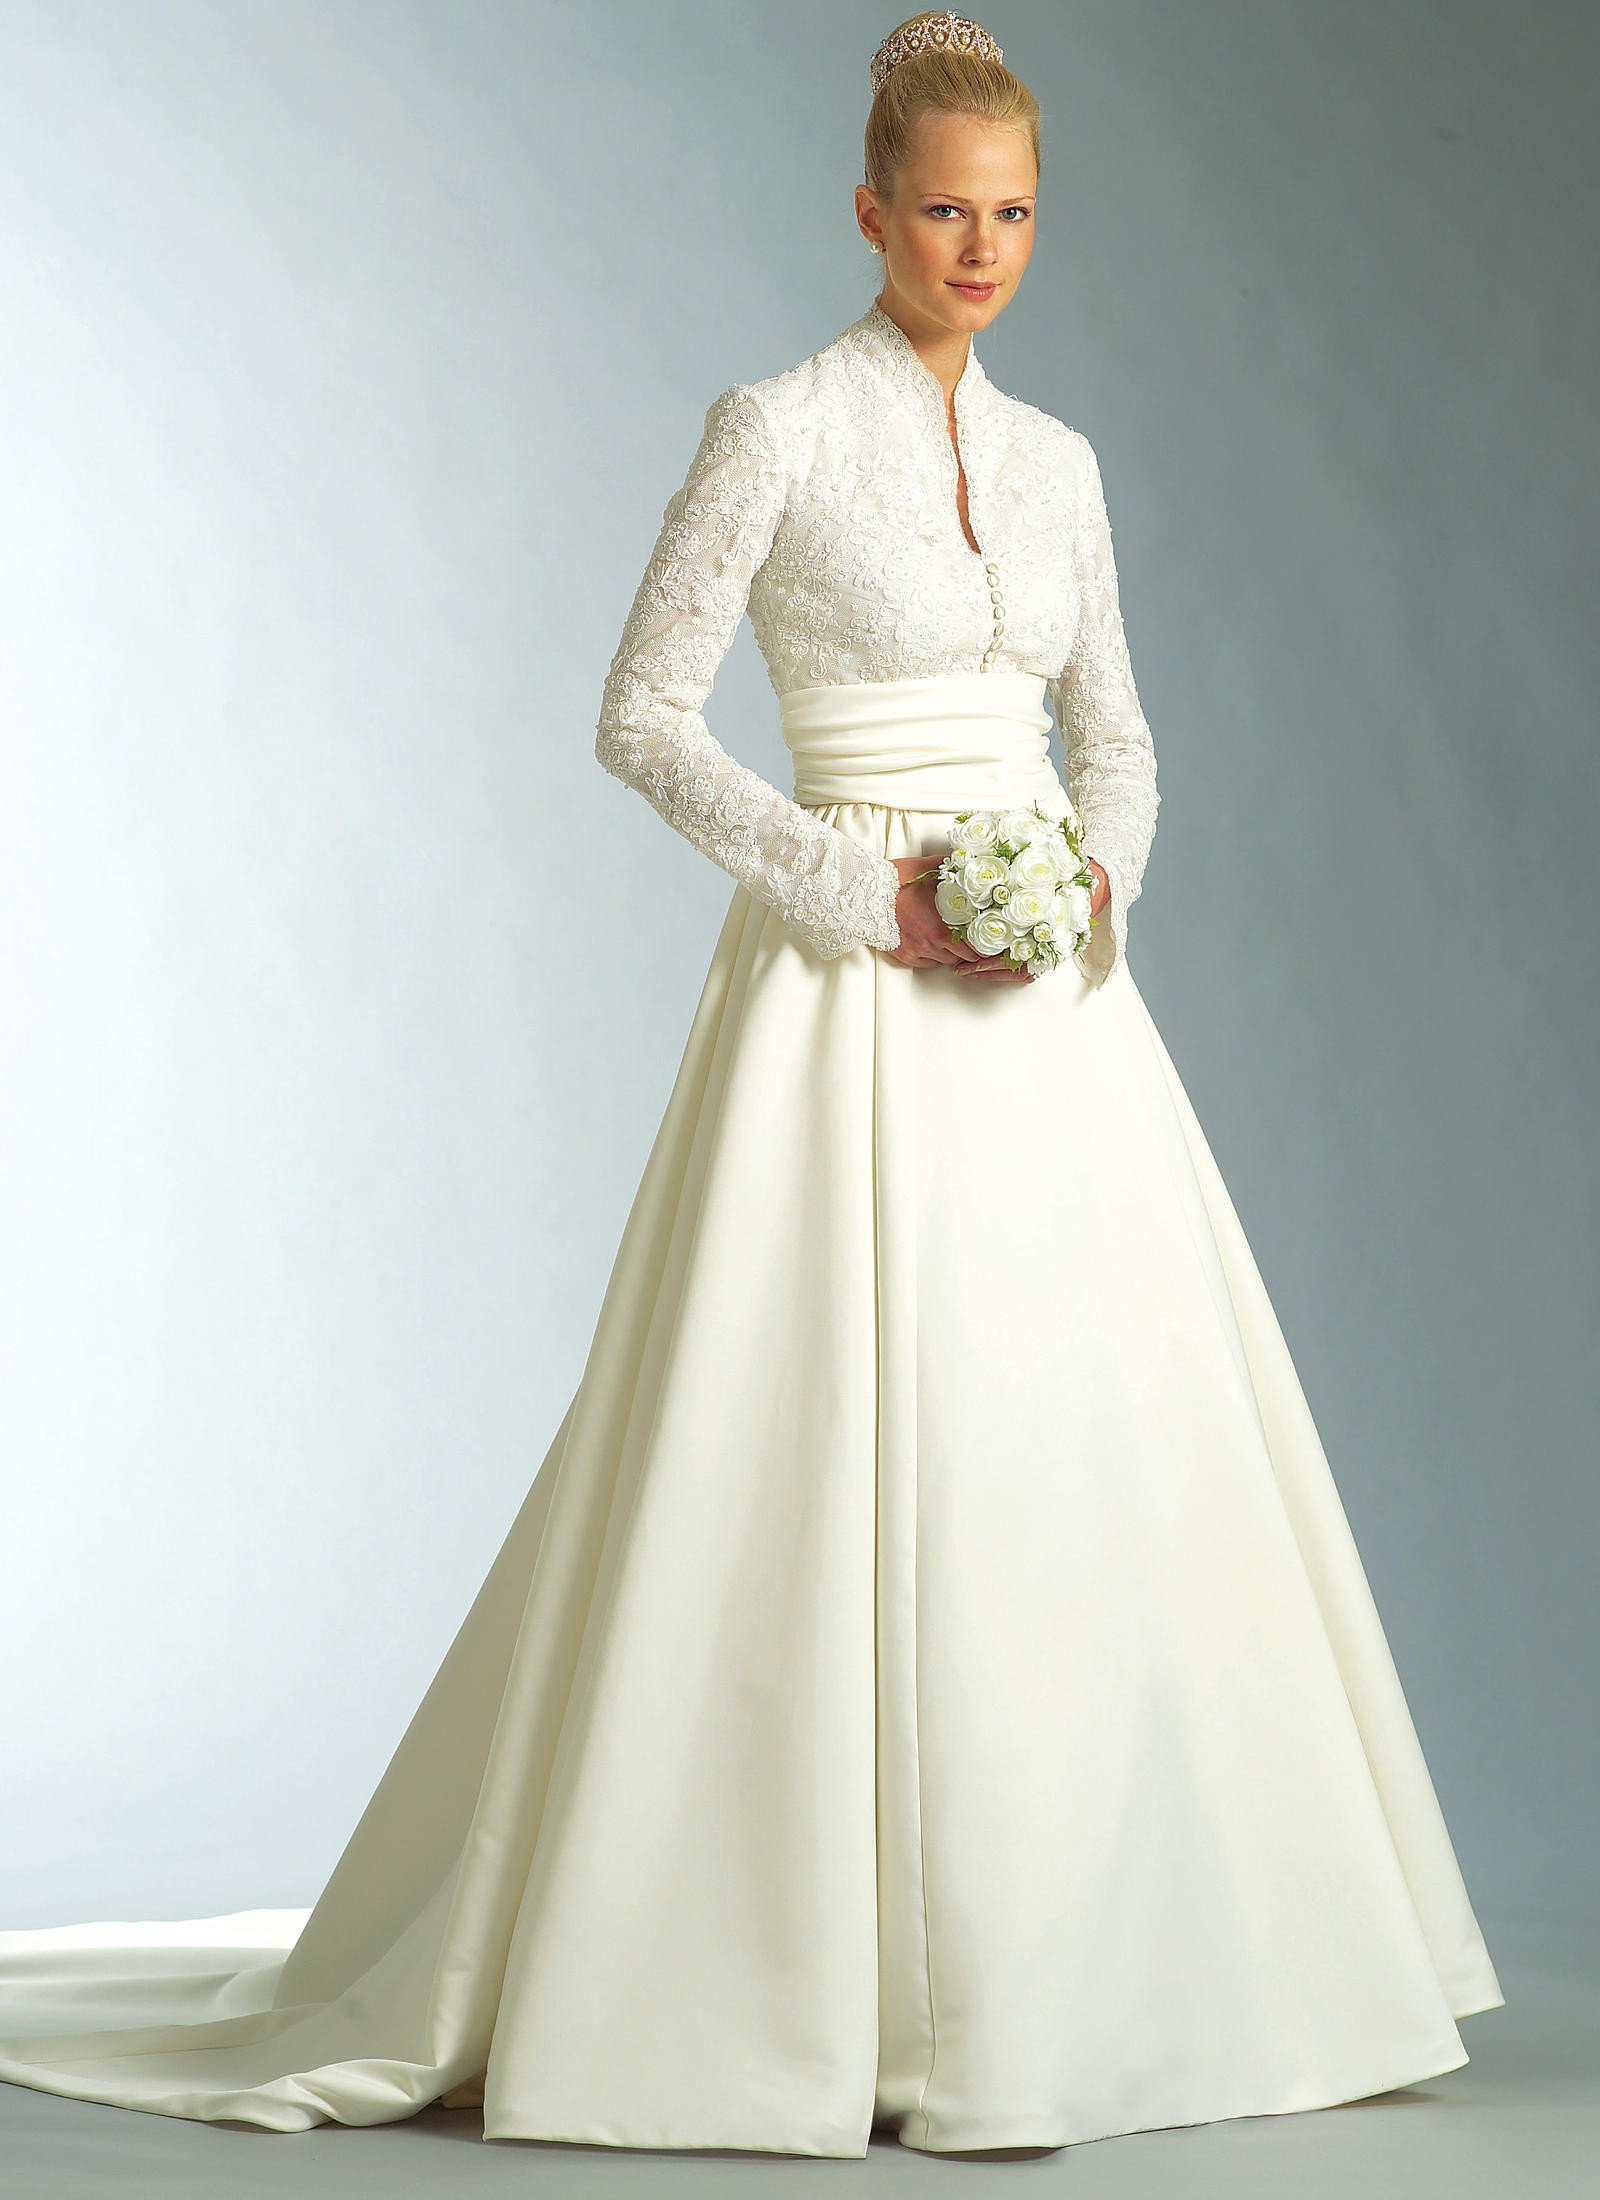 Wedding Dress Patterns Free Links to Over Twenty In Print Bridal Gown Sewing Patterns